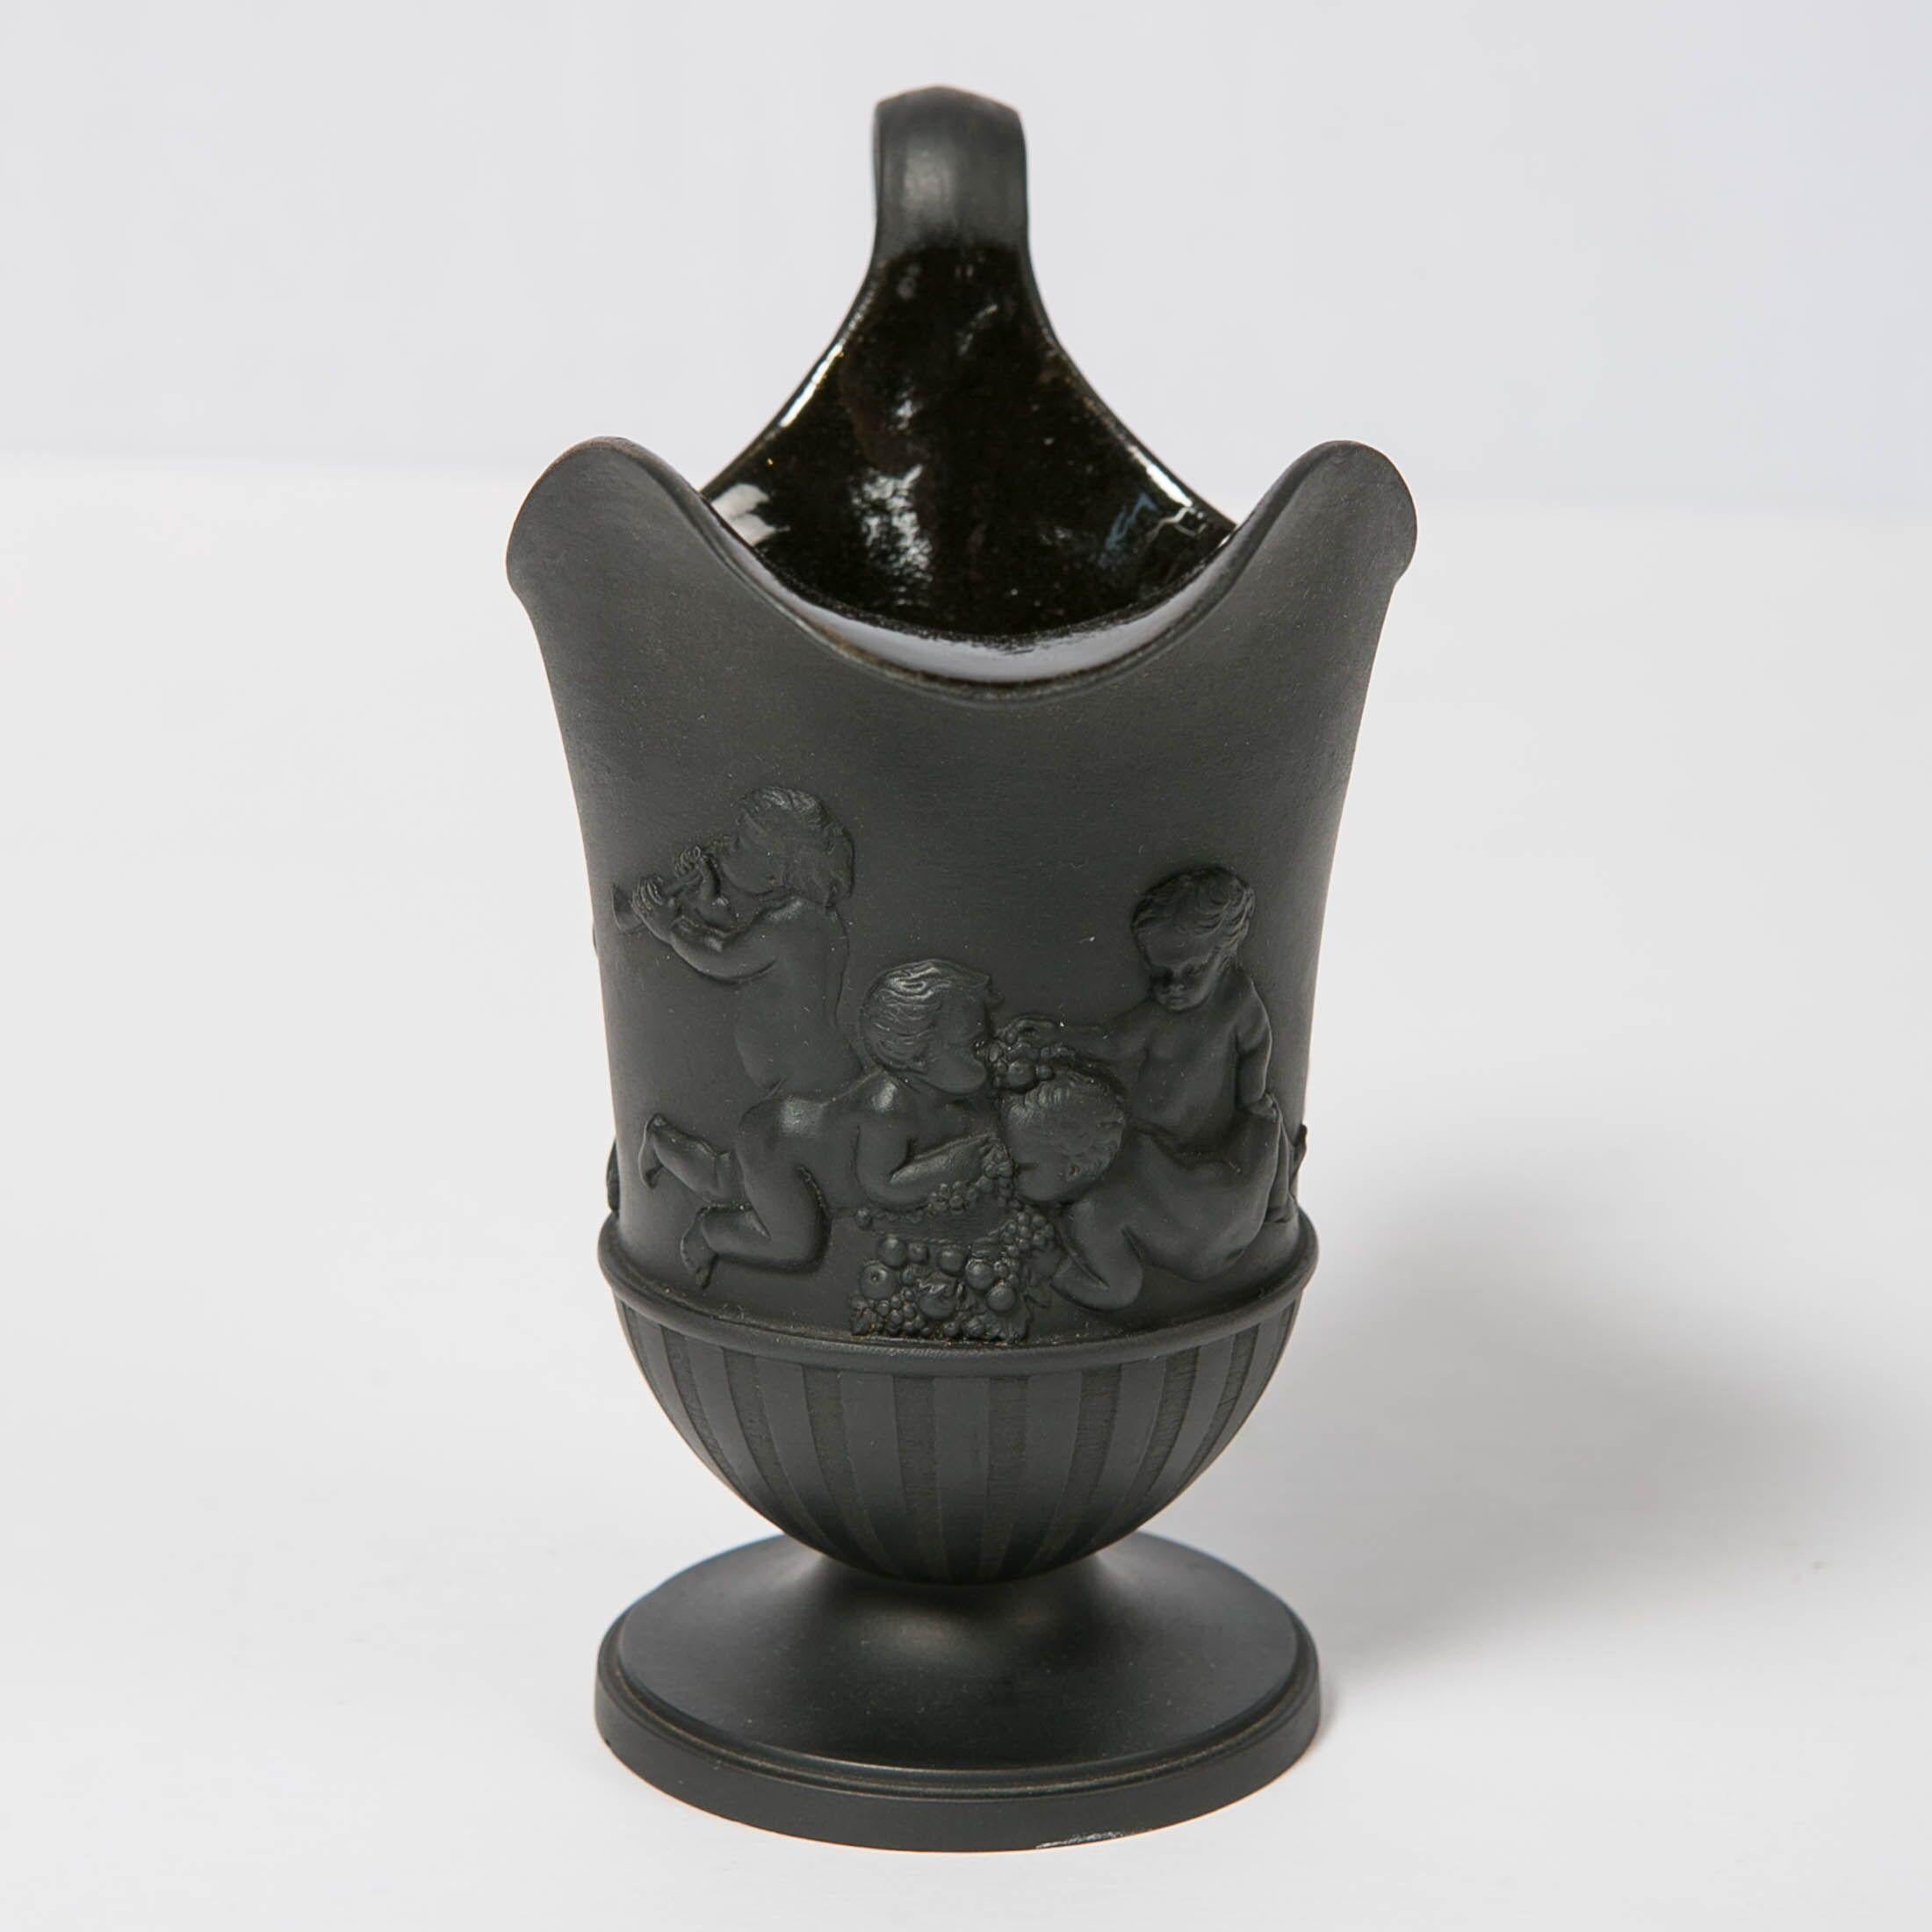 We are pleased to offer this Wedgwood black basalt helmet shaped pitcher. Made on a lathe with engine turning vertical lines rising from a round base. The pitcher is further decorated with embossed classical figures of children at play. It is